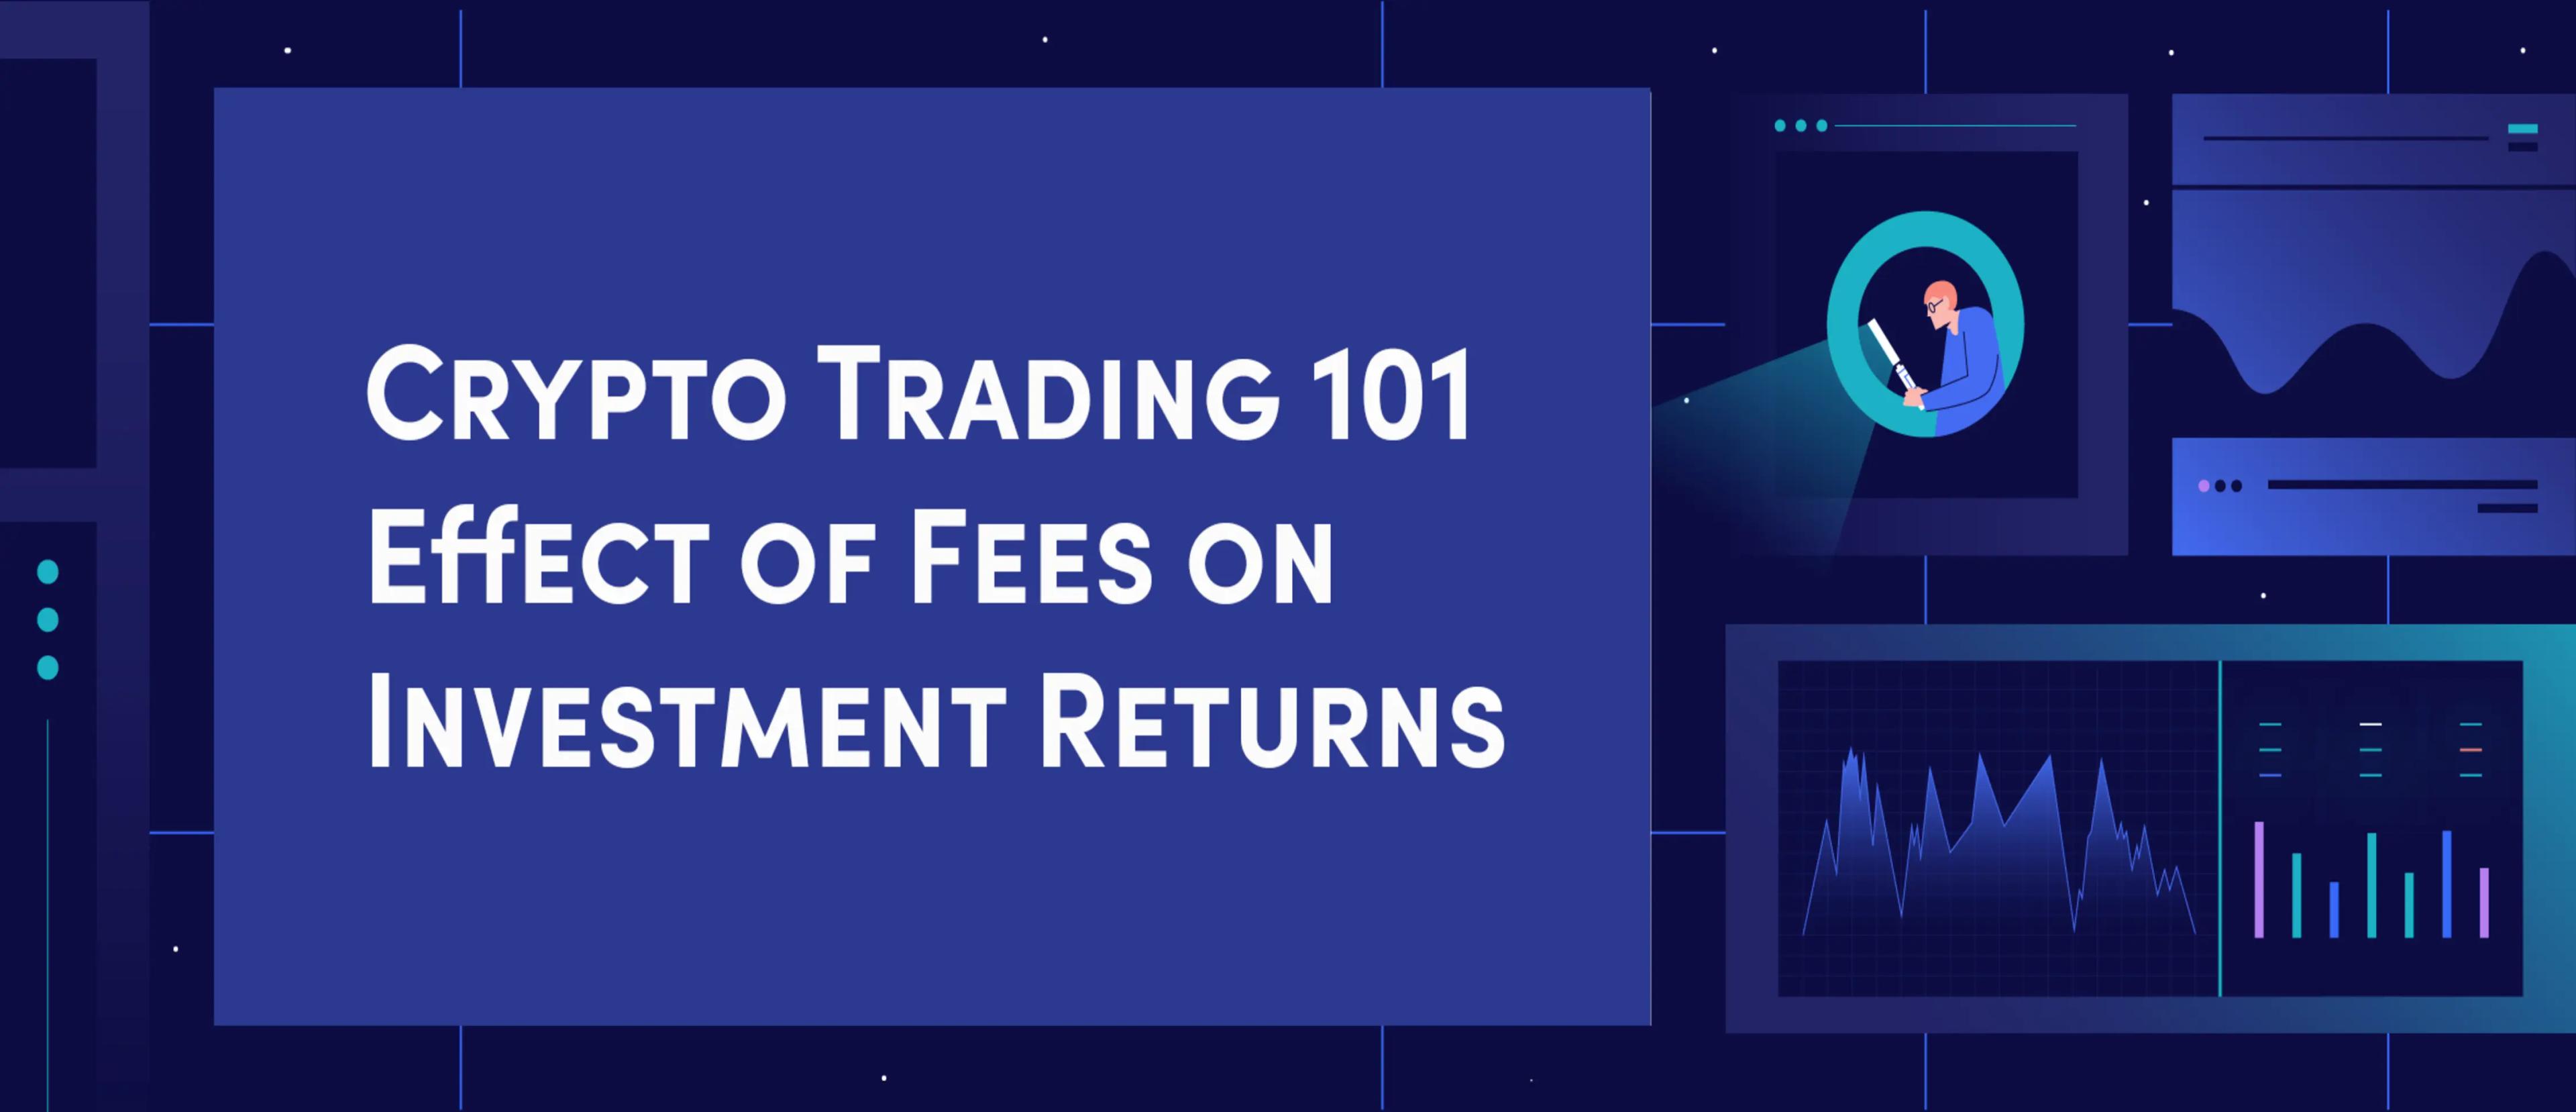 Crypto Trading 101 | Effect of Fees on Investment Returns